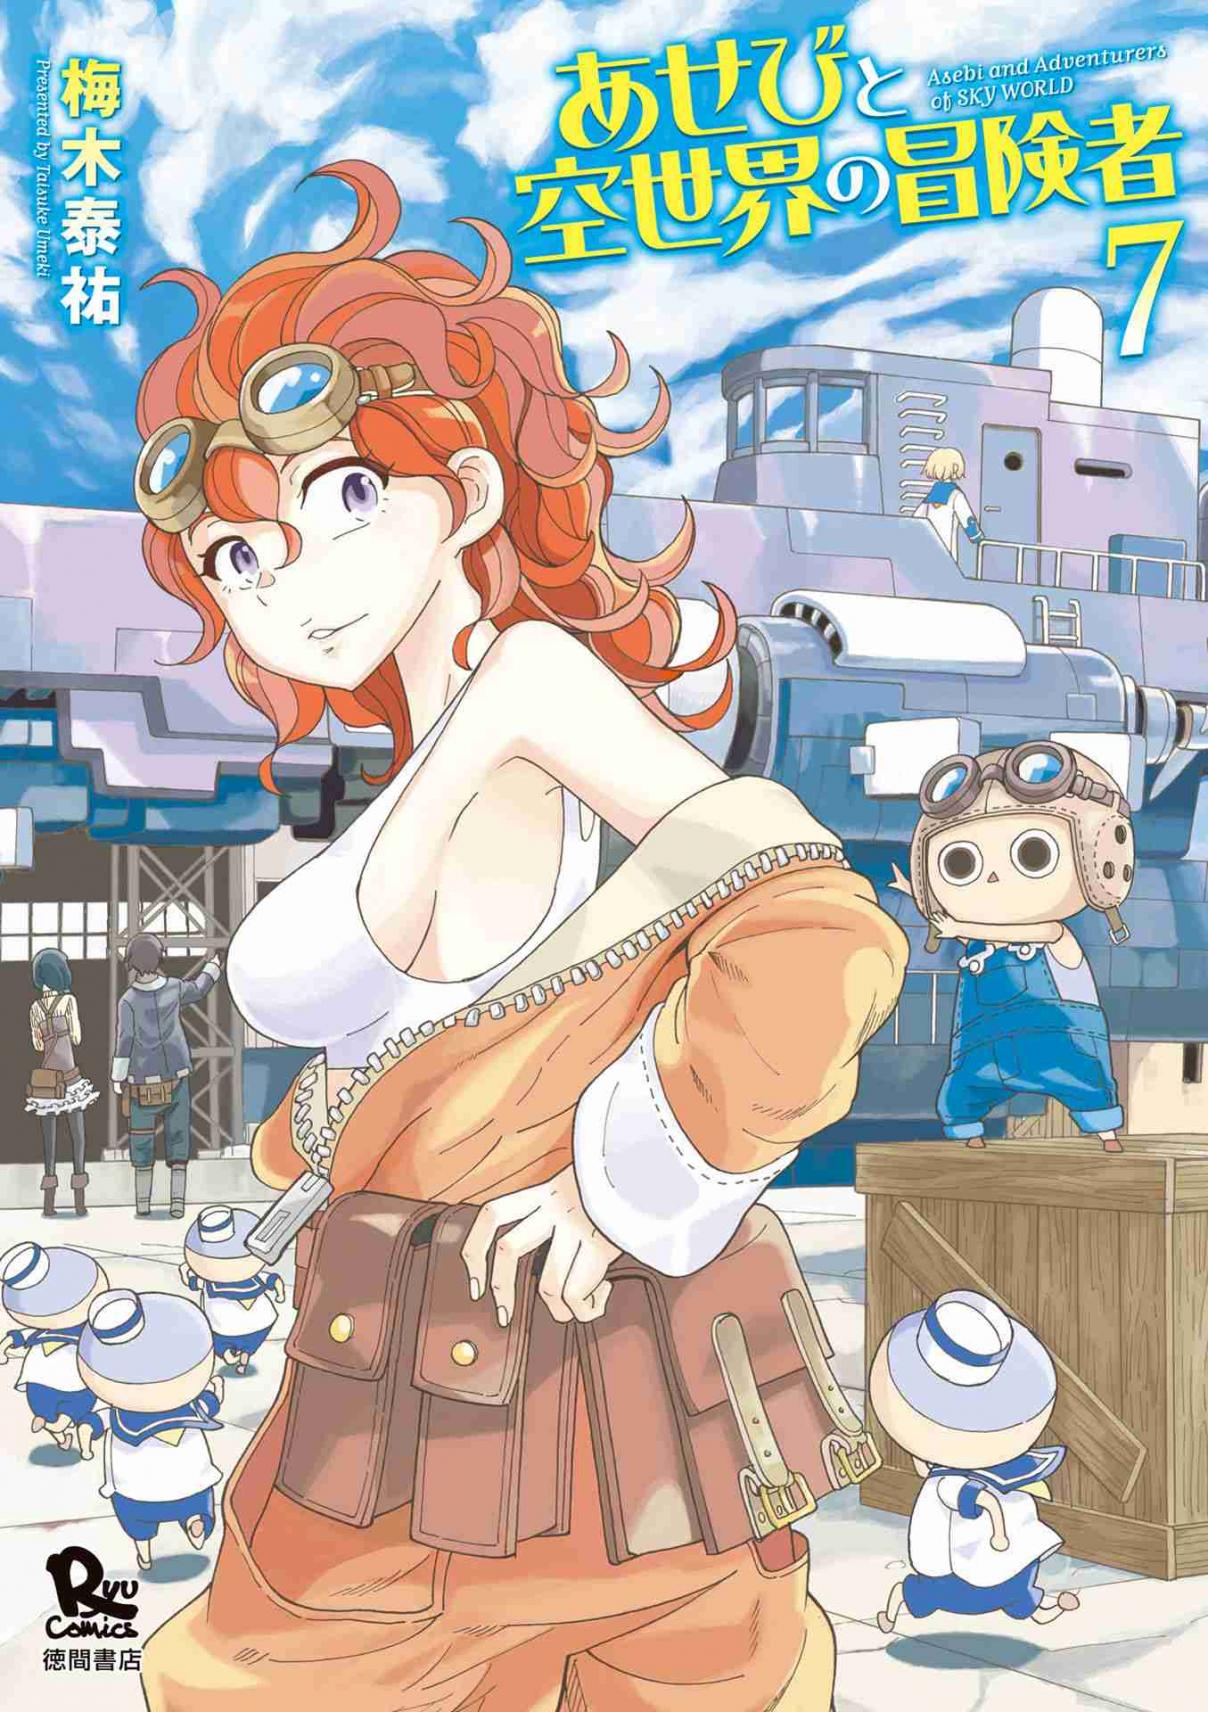 Asebi and Adventurers of Sky World Vol. 7 Ch. 33 Asebi and people of sky world